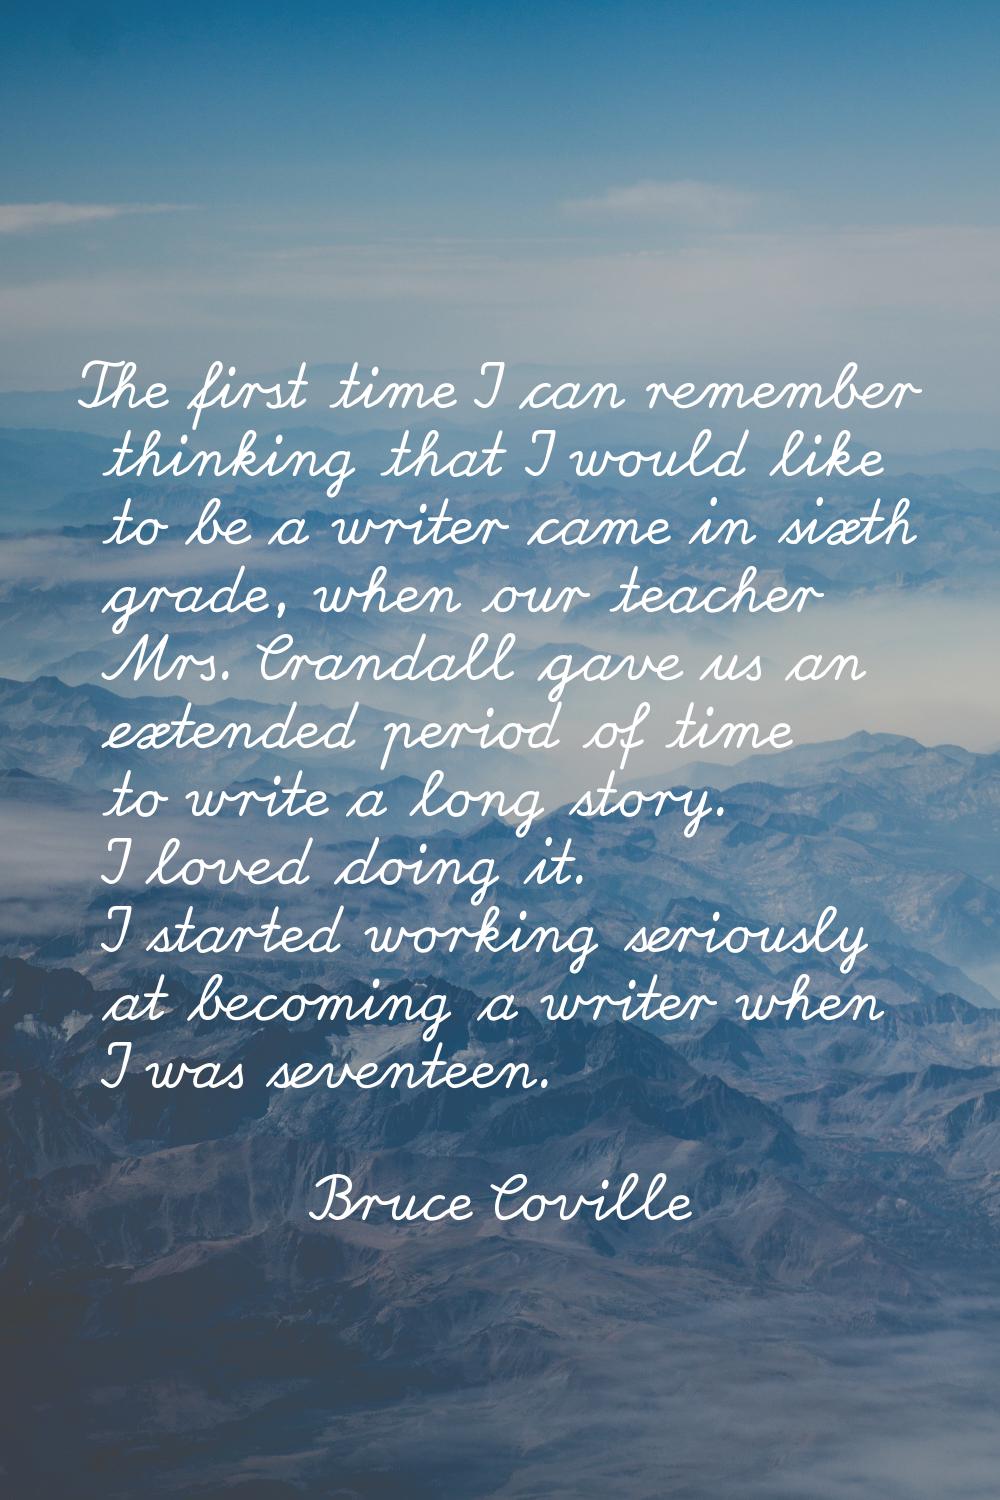 The first time I can remember thinking that I would like to be a writer came in sixth grade, when o